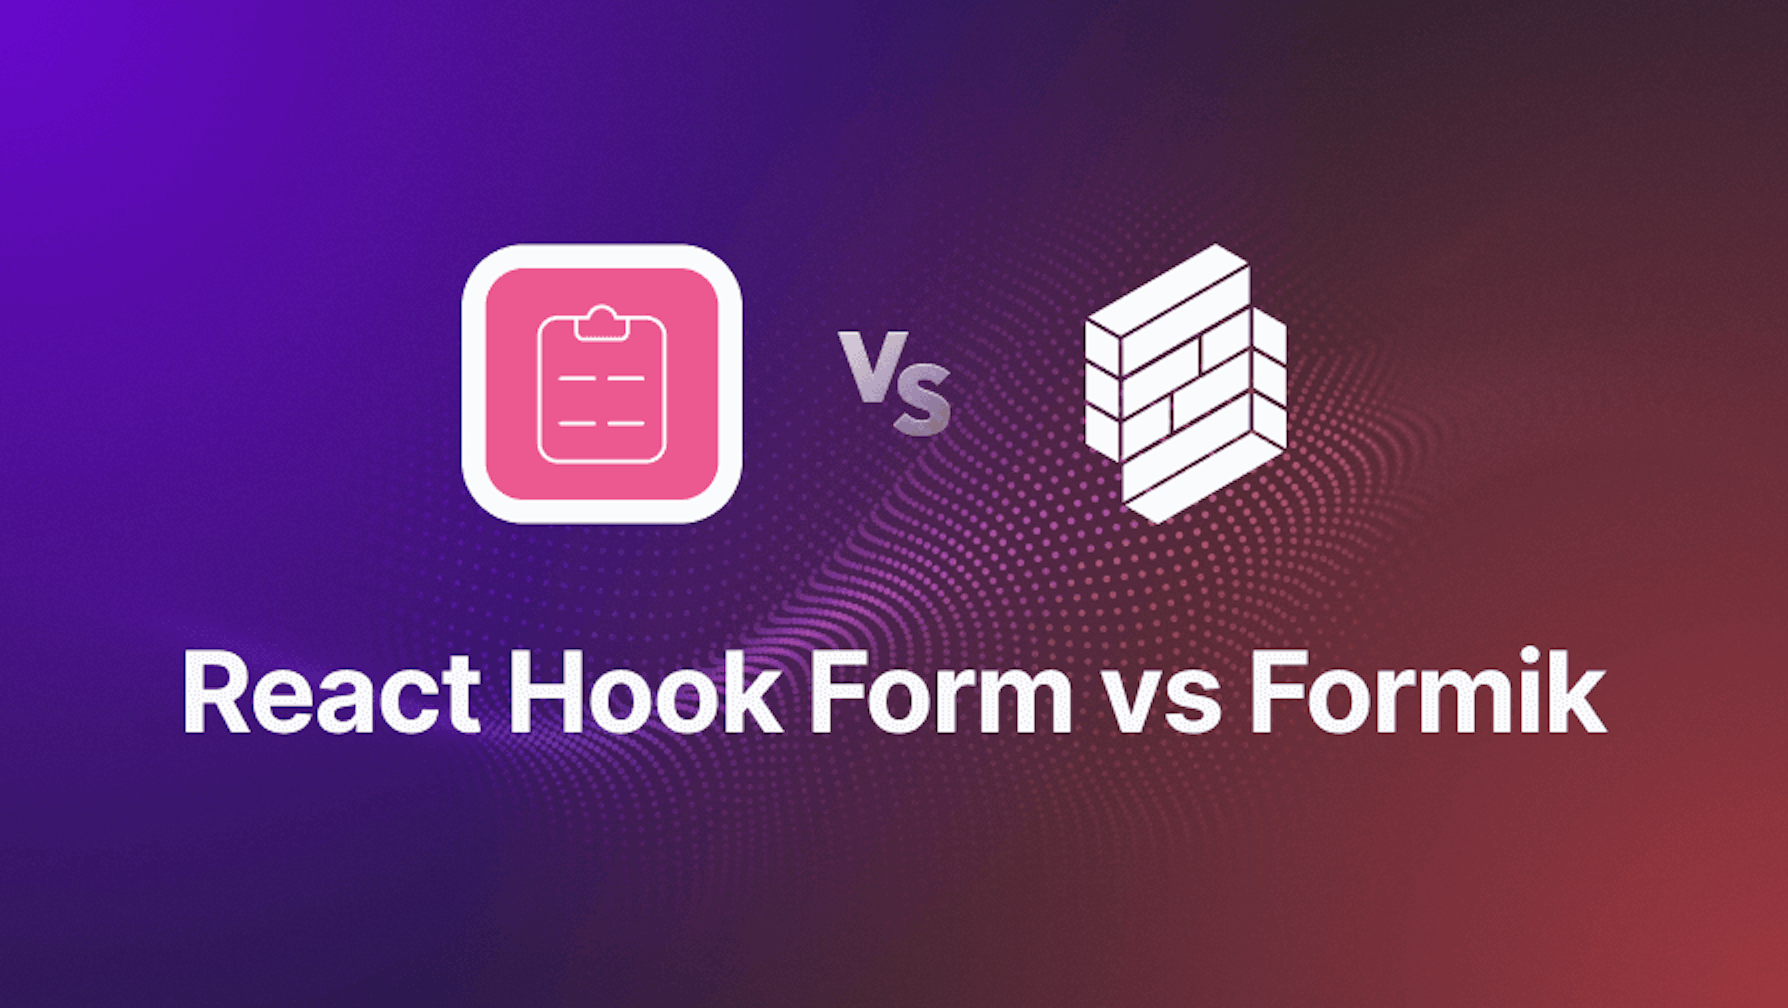 React Hook Form vs Formik - Comparing the most popular React form libraries